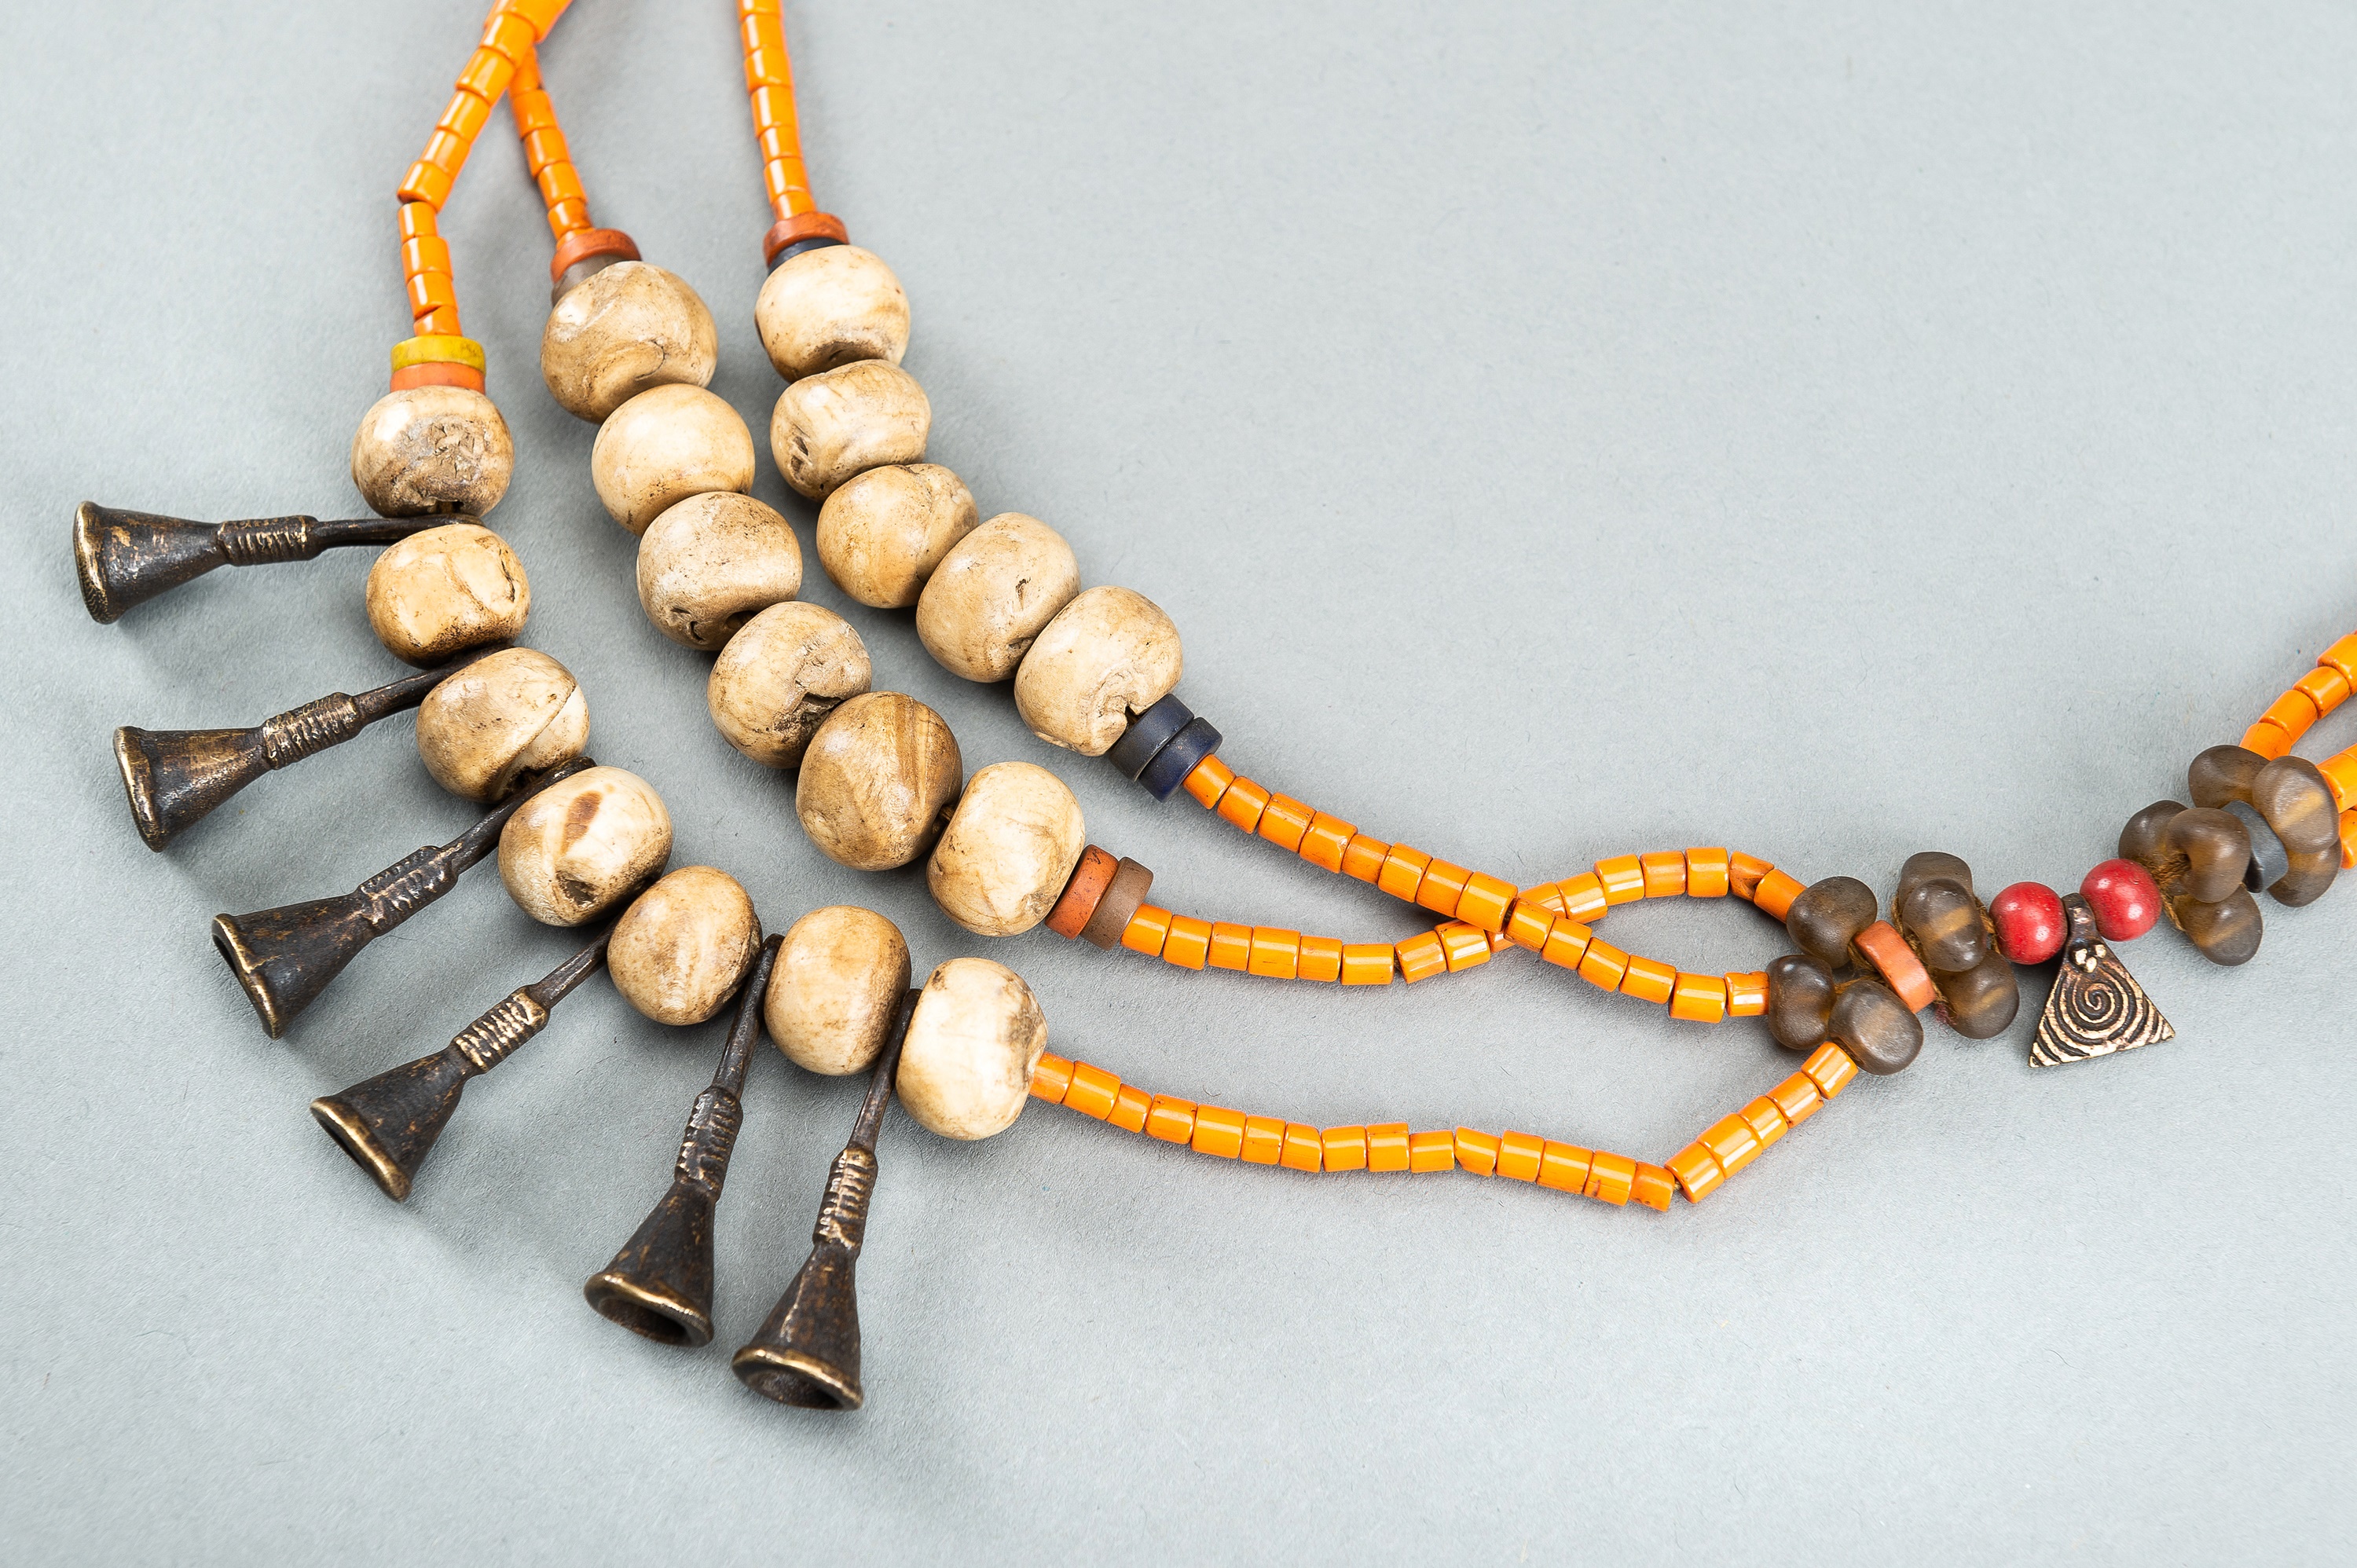 A NAGALAND MULTI-COLORED GLASS, BRASS AND SHELL NECKLACE, c. 1900s - Image 5 of 10